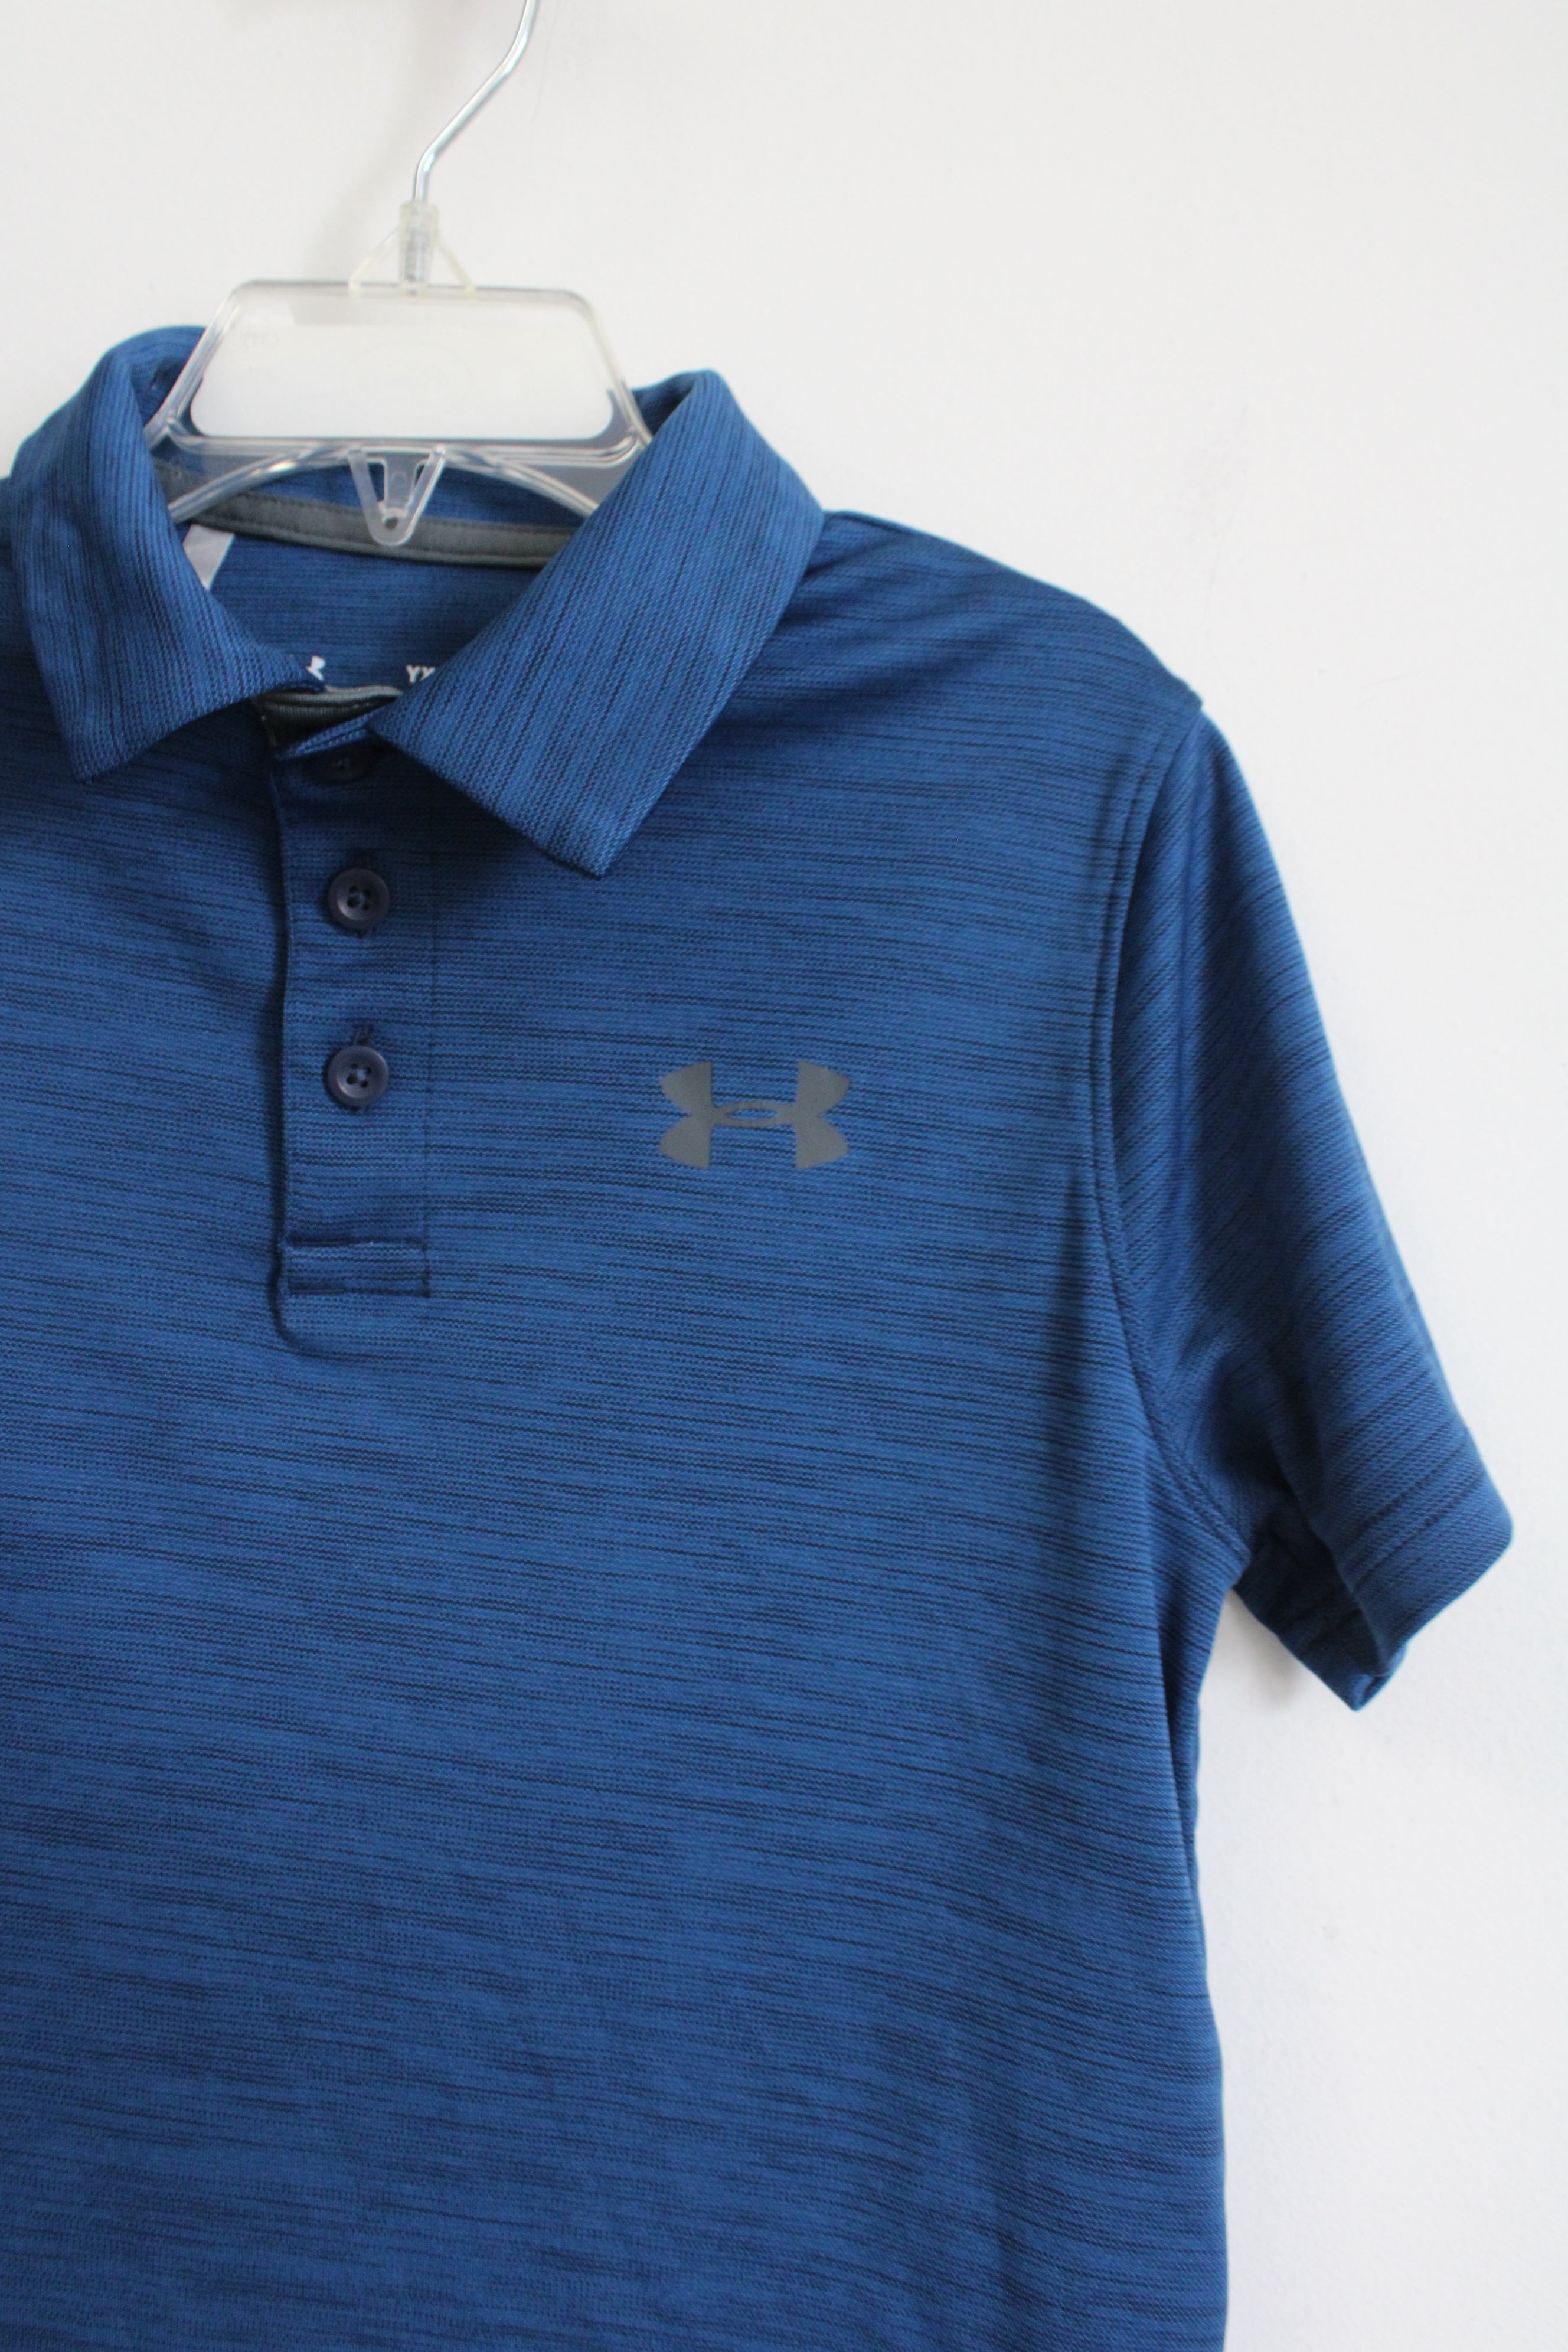 Under Armour Blue Polo Shirt | Youth XS (6)